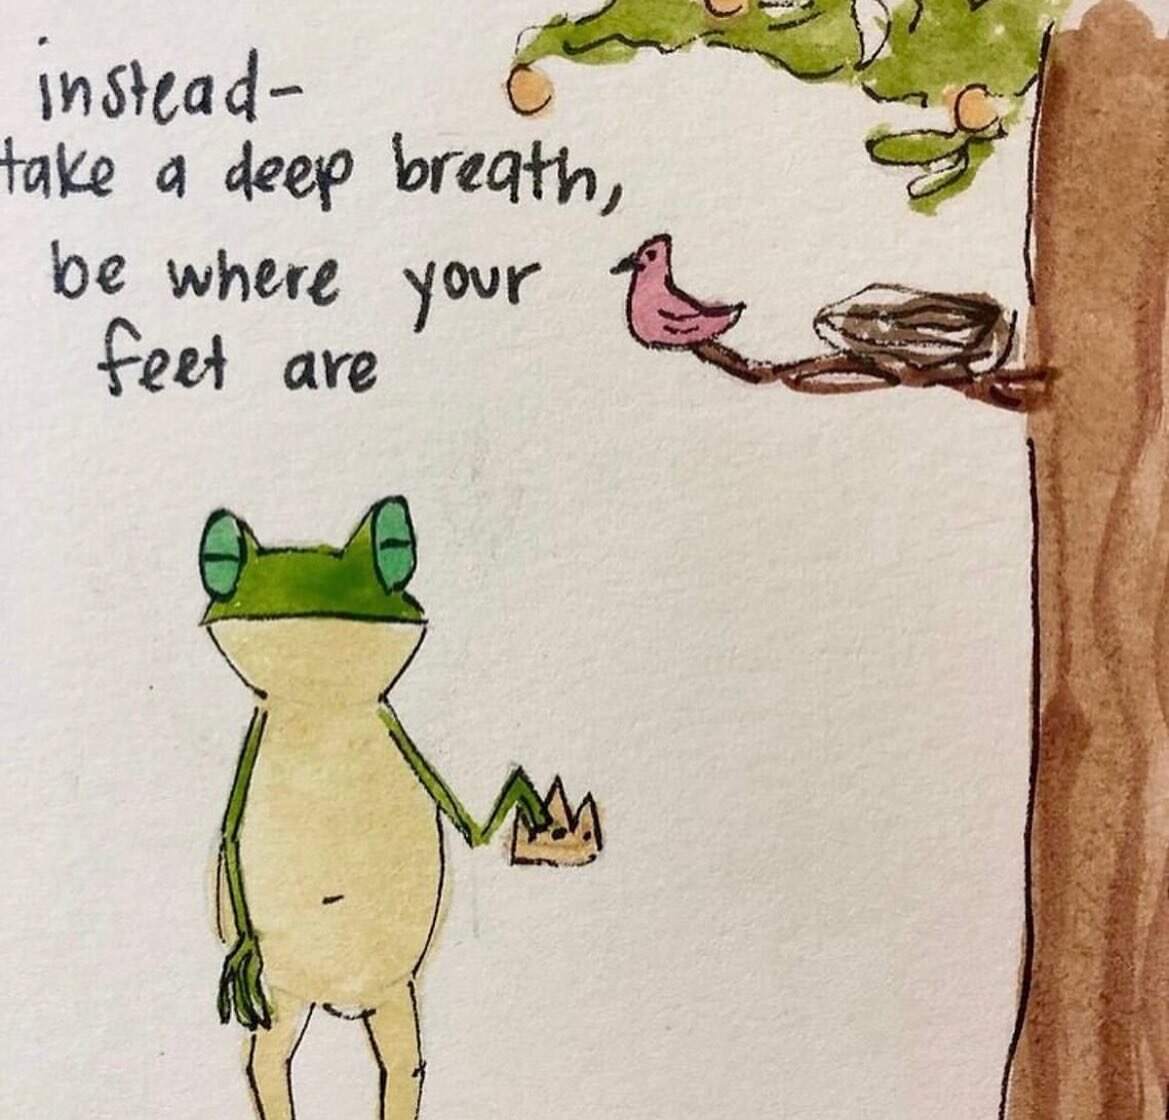 Be where your feet are. If that&rsquo;s not great advice I don&rsquo;t know what is cartoon by @justfrogetaboutit